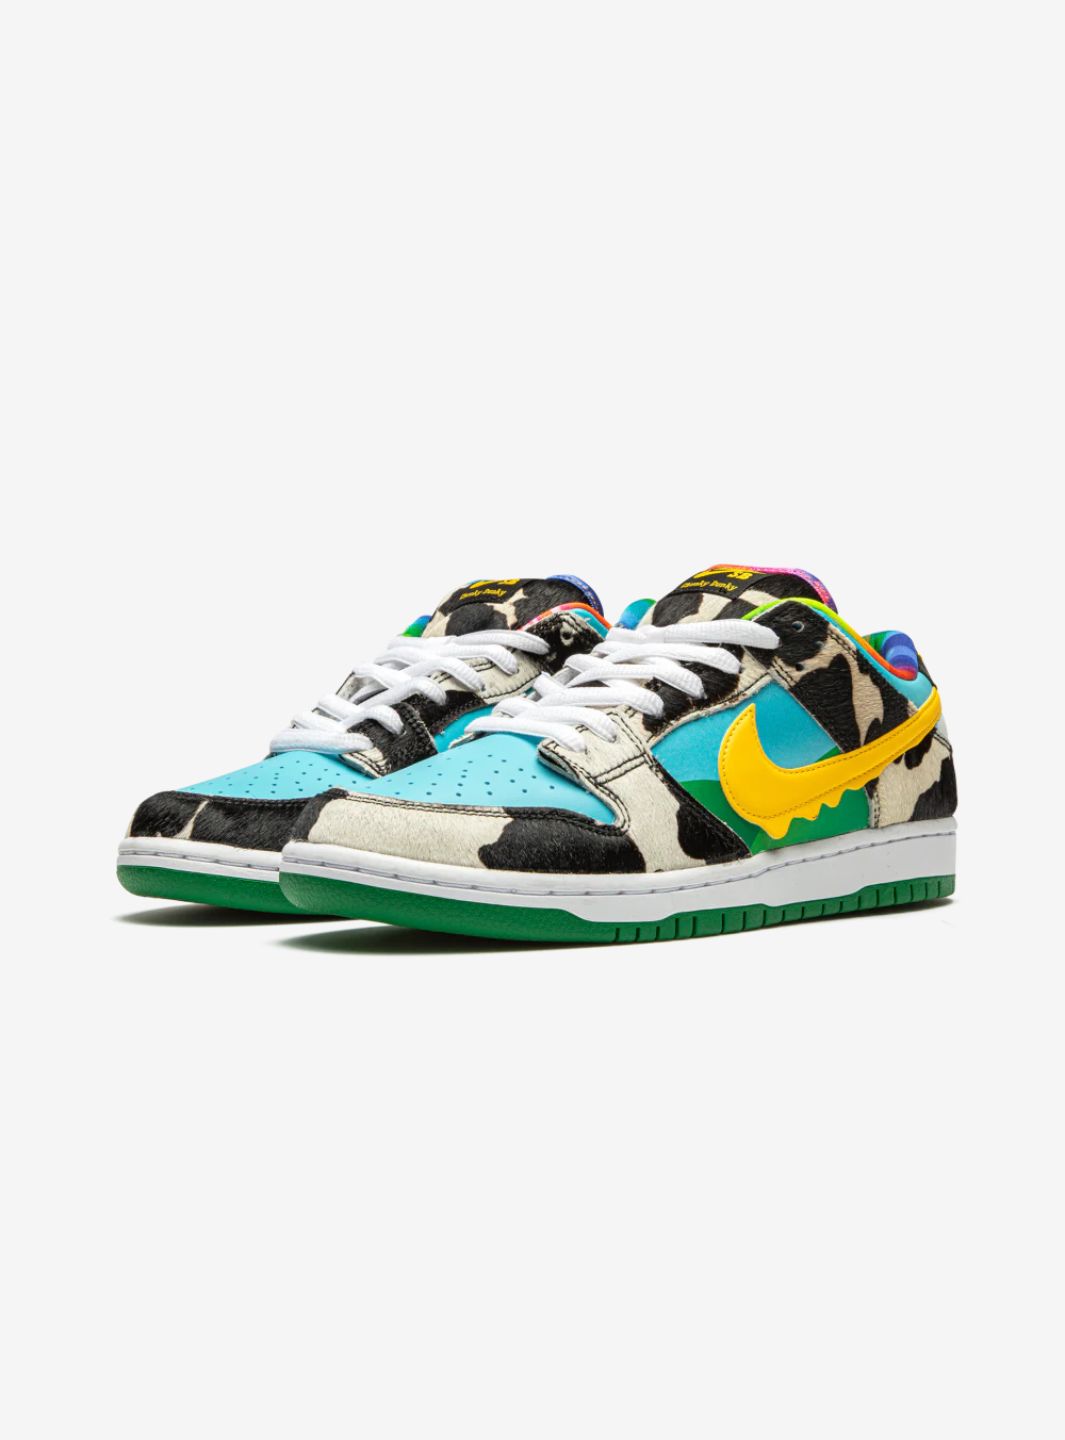 Nike SB Dunk Low Ben & Jerry's Chunky Dunky - CU3244-100 | ResellZone